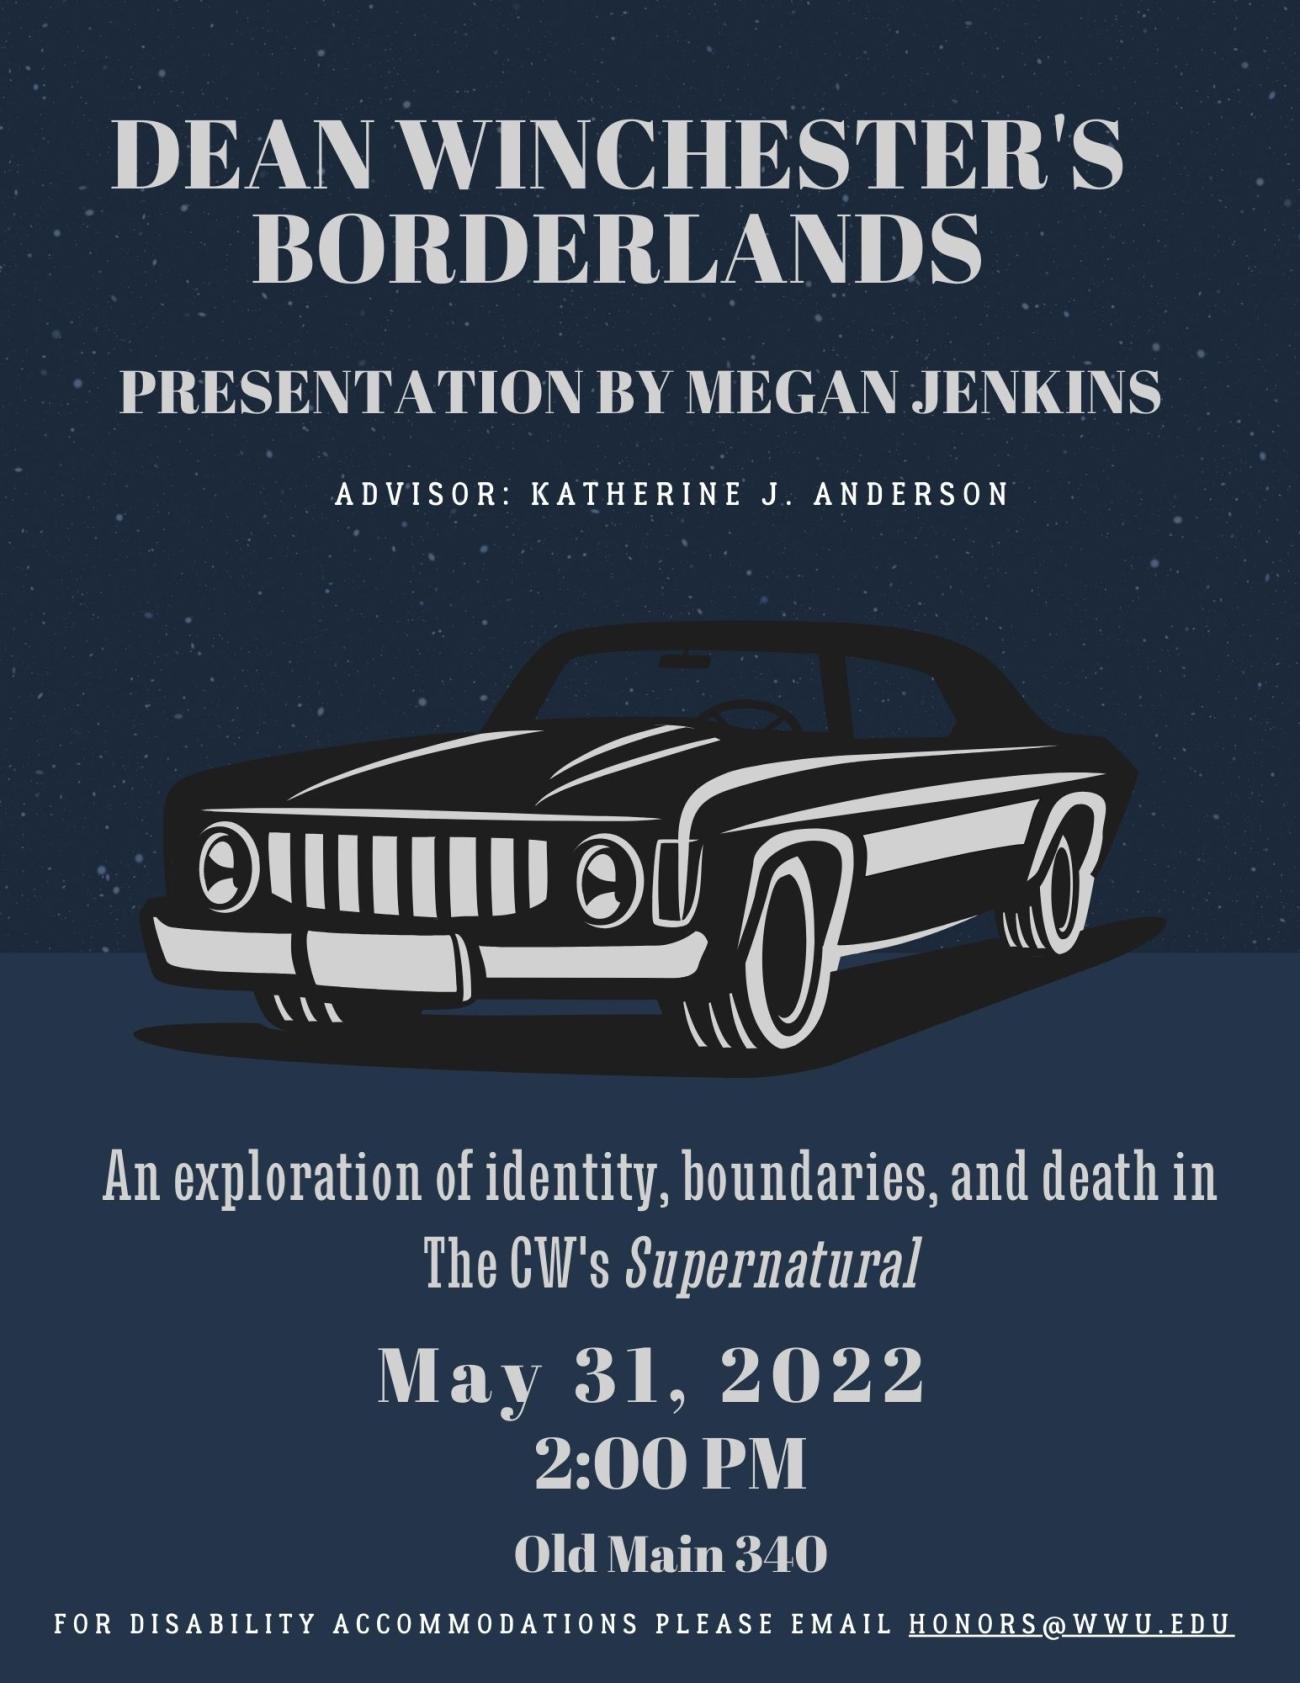 Navy background with stars and an illustration of a black vintage car with gray accents. Text reads "Dean Winchester's Borderlands. Presentation by Megan Jenkins, advised by Katherine J. Anderson. An exploration of identity, borderlands, and death in The CW's Supernatural. May 31, 2022 at 2:00 pm. Old Main 340. For disability accommodations please email honors@wwu.edu."